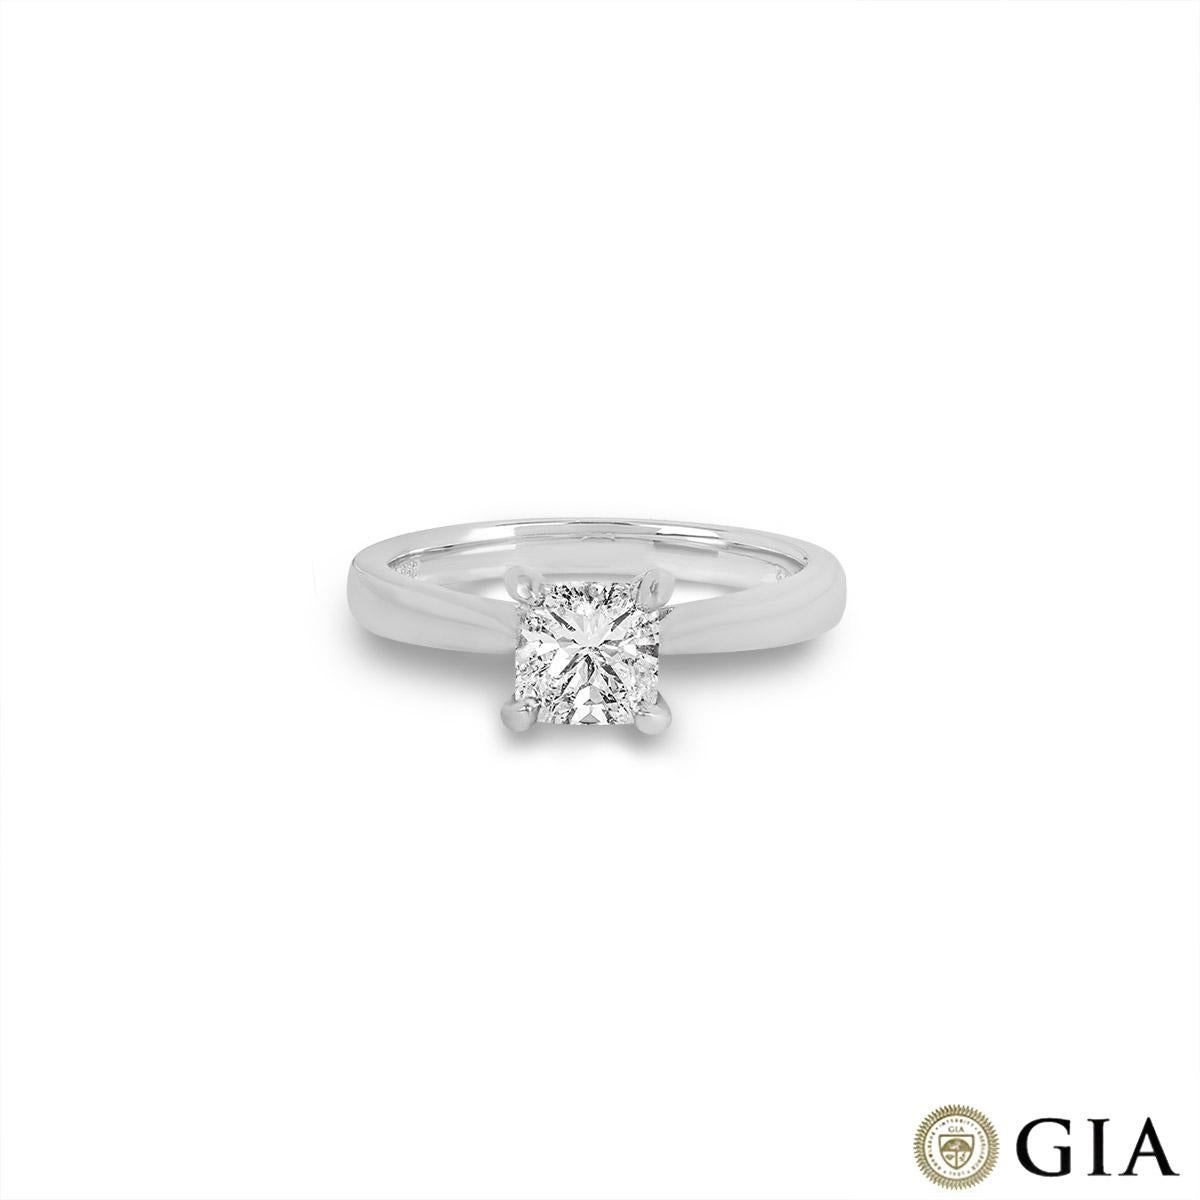 GIA Certified Platinum Cushion Cut Diamond Ring 0.91ct I/VS2 In New Condition For Sale In London, GB